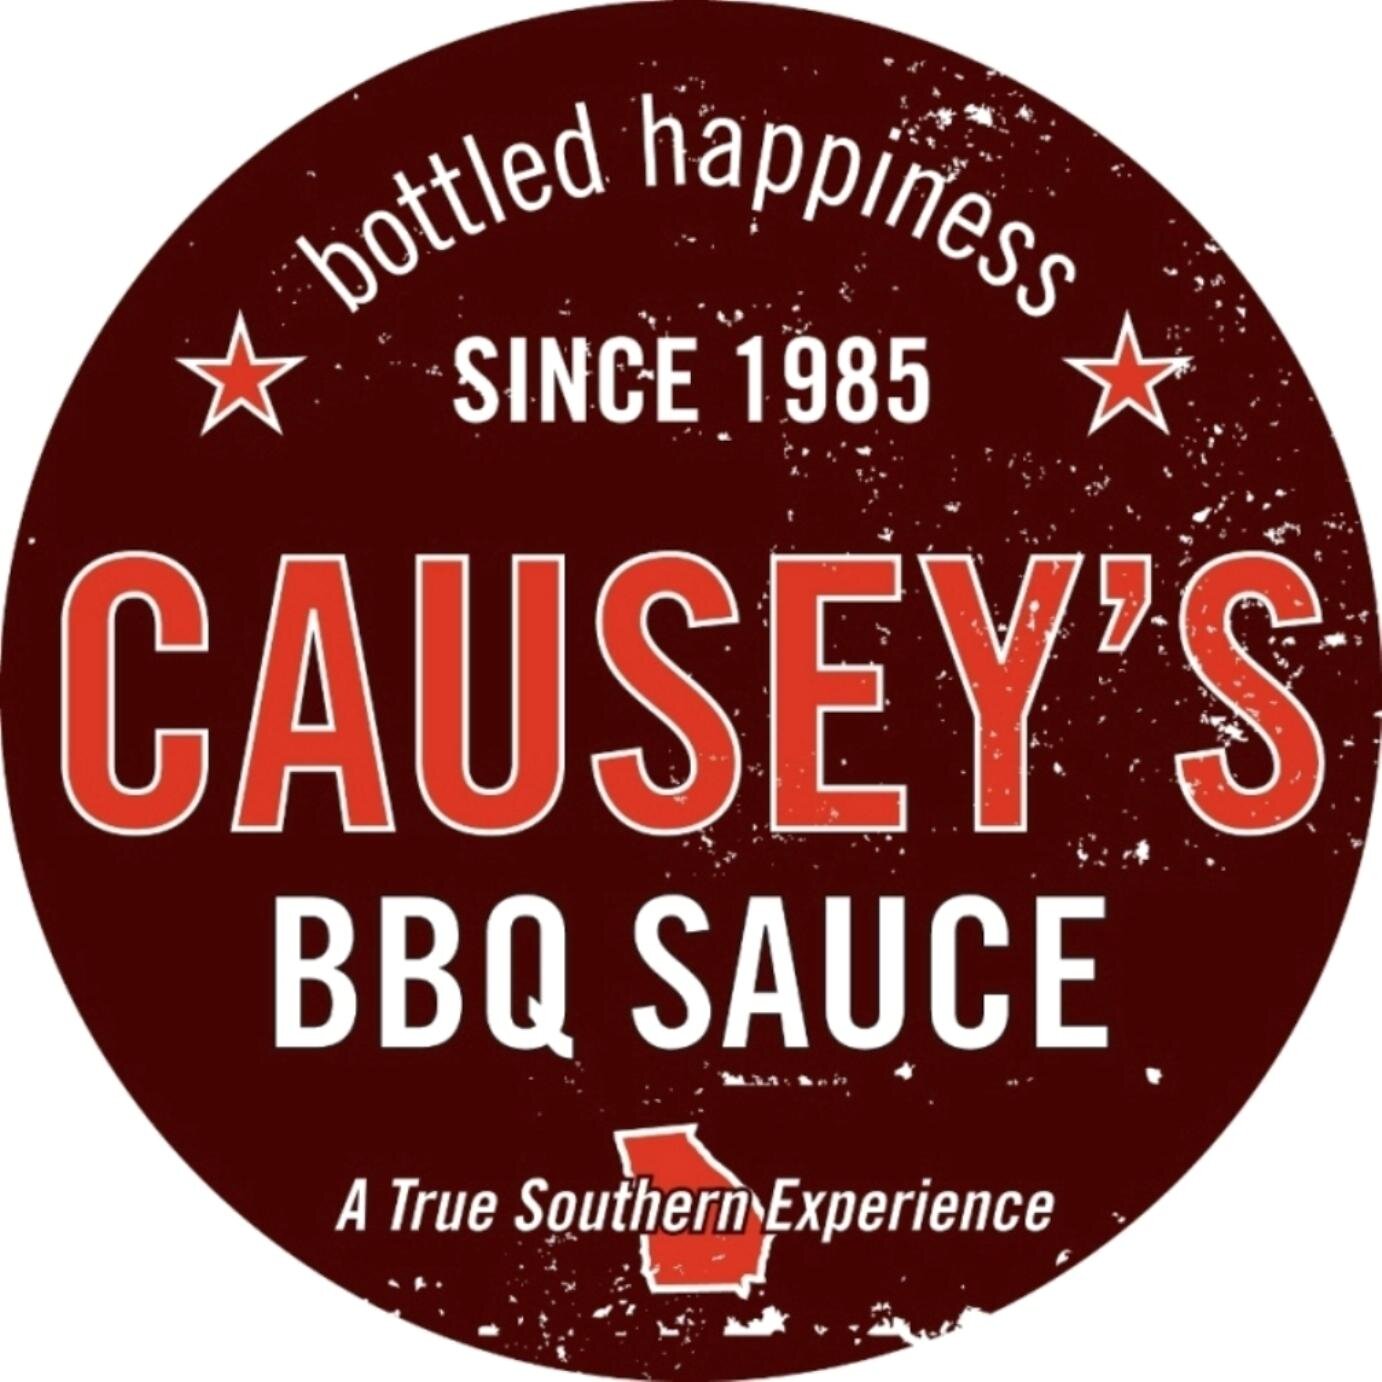 A family owned & operated business sharing our Georgia made BBQ sauces & dry rubs. Bottled happiness guaranteed to give you a true Southern experience!